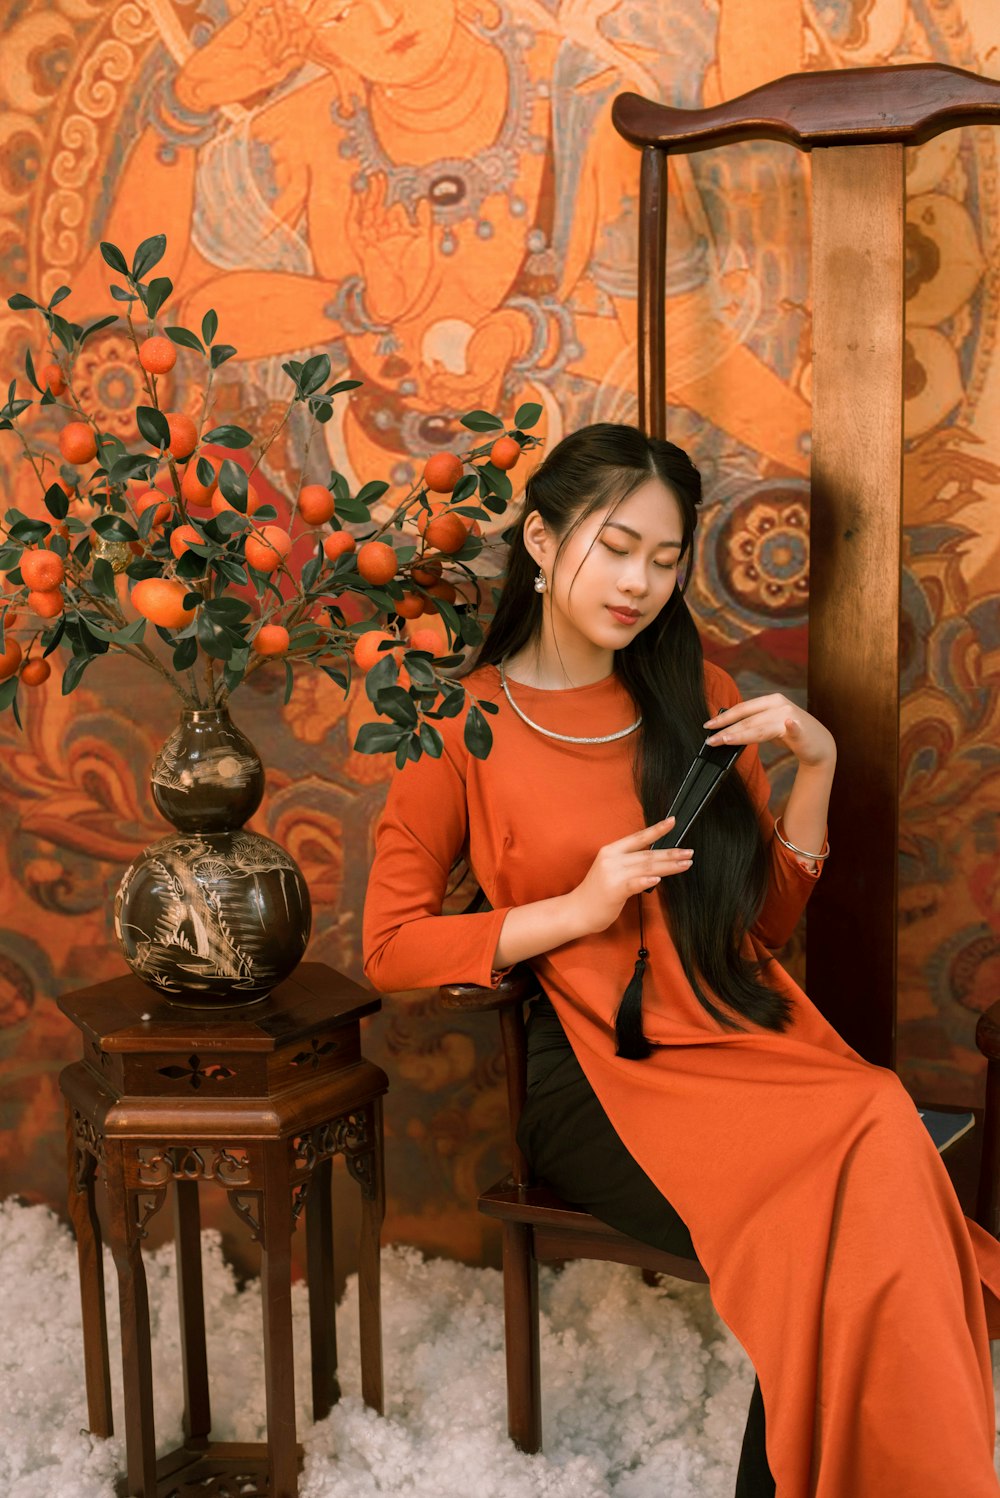 a woman in an orange dress sitting on a chair